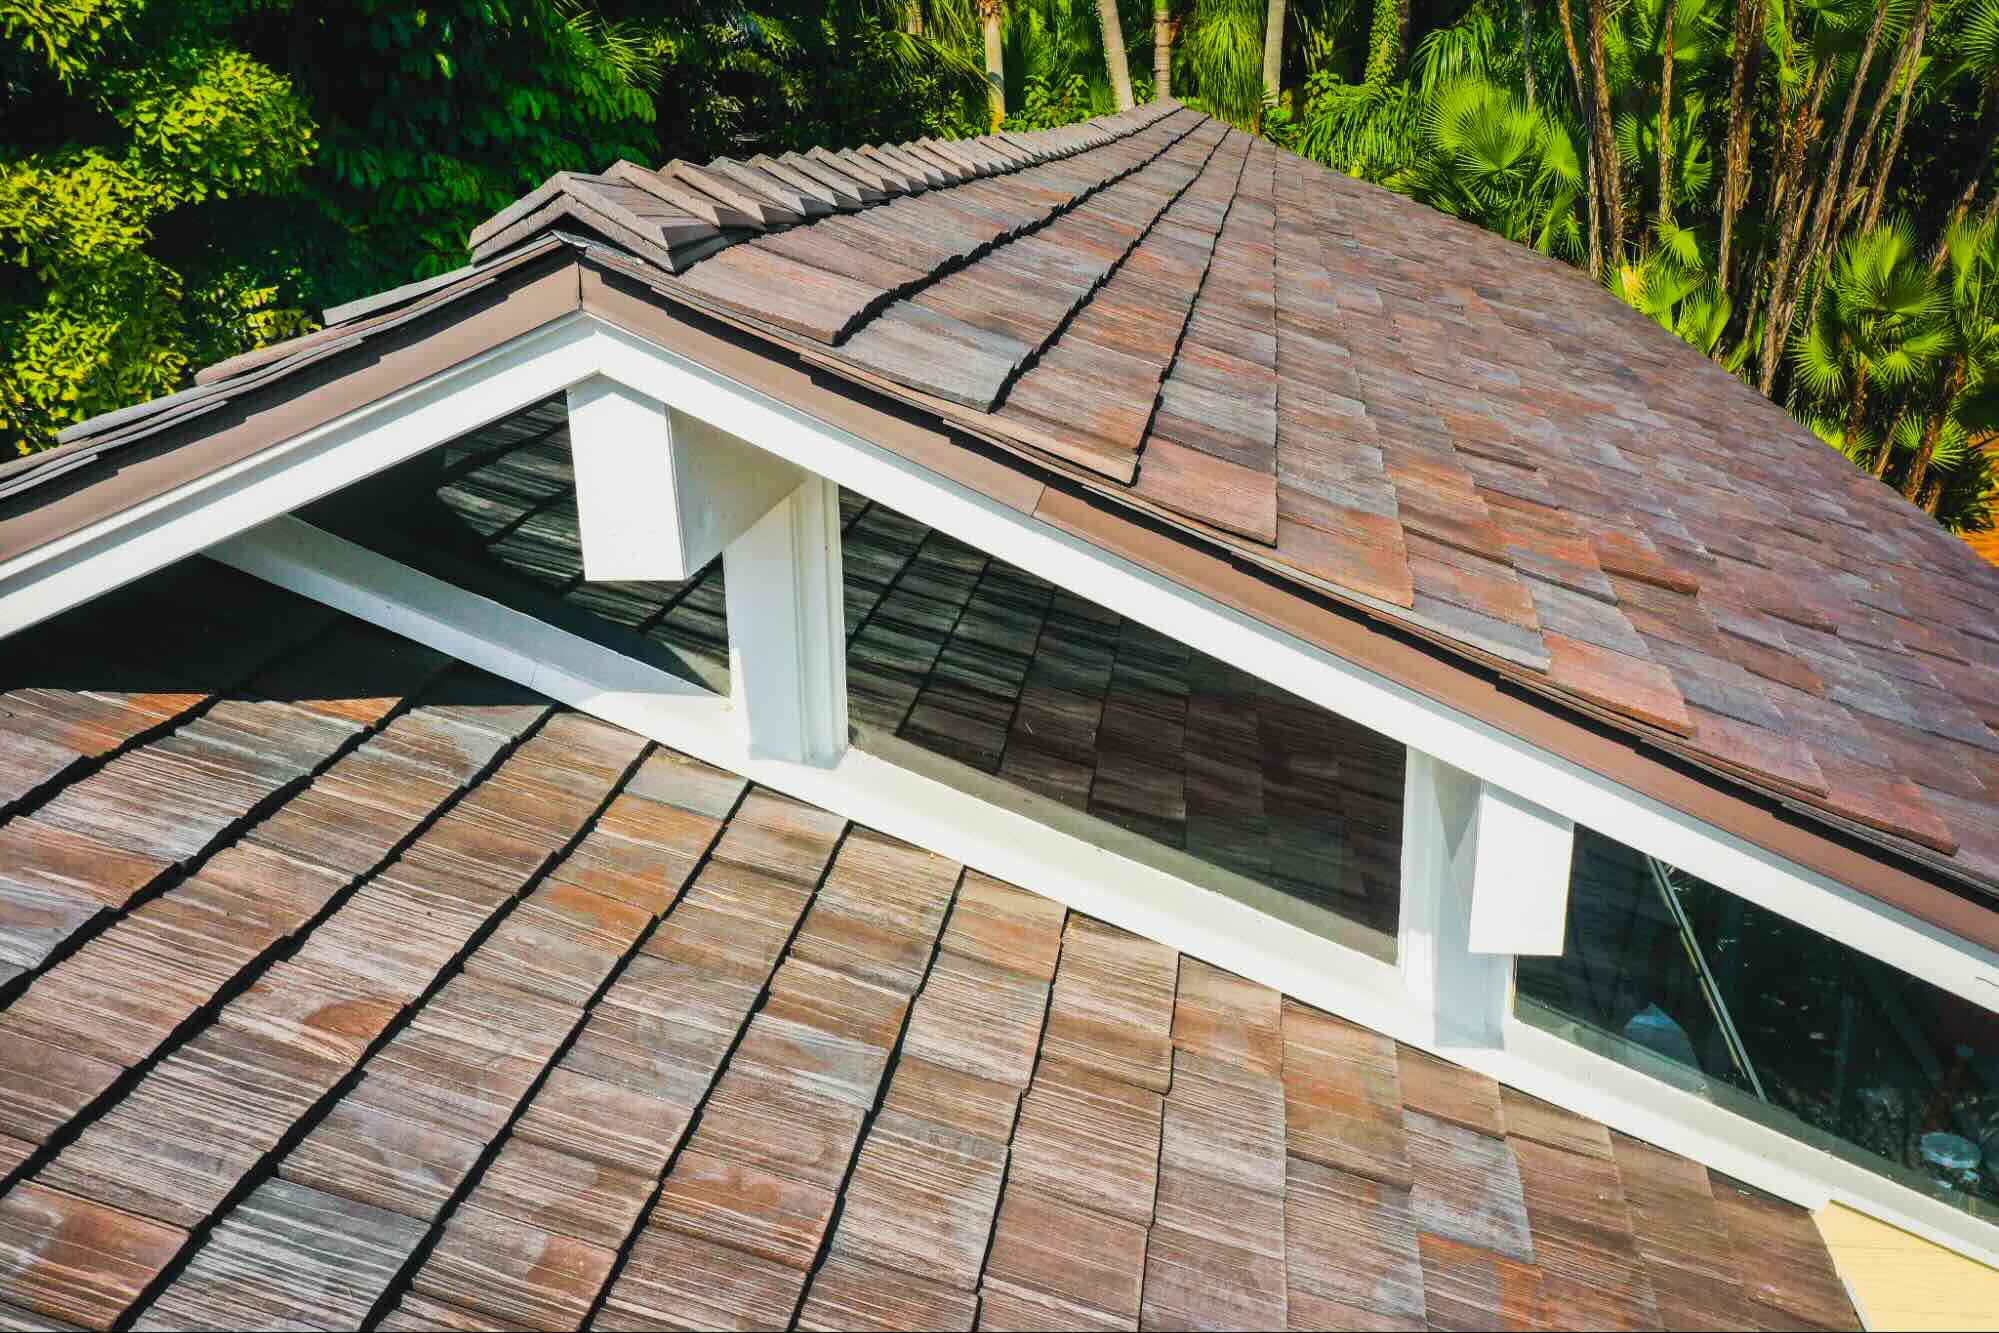 How To Add A Gable Roof To An Existing Roof